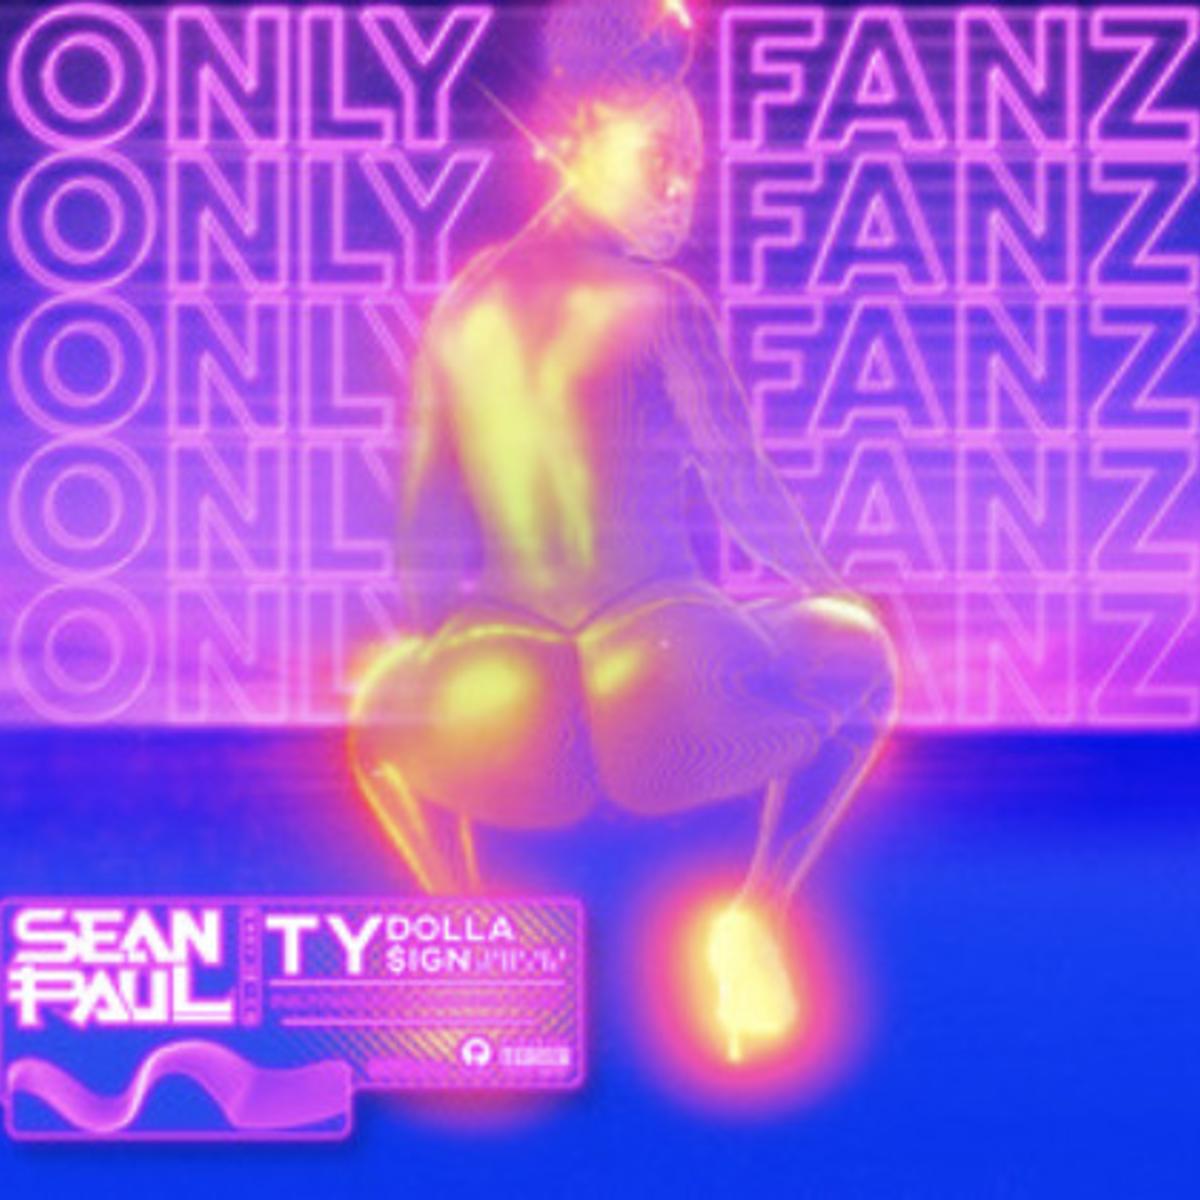 Sean Paul & Ty Dolla $ign Link Up For “Only Fanz”